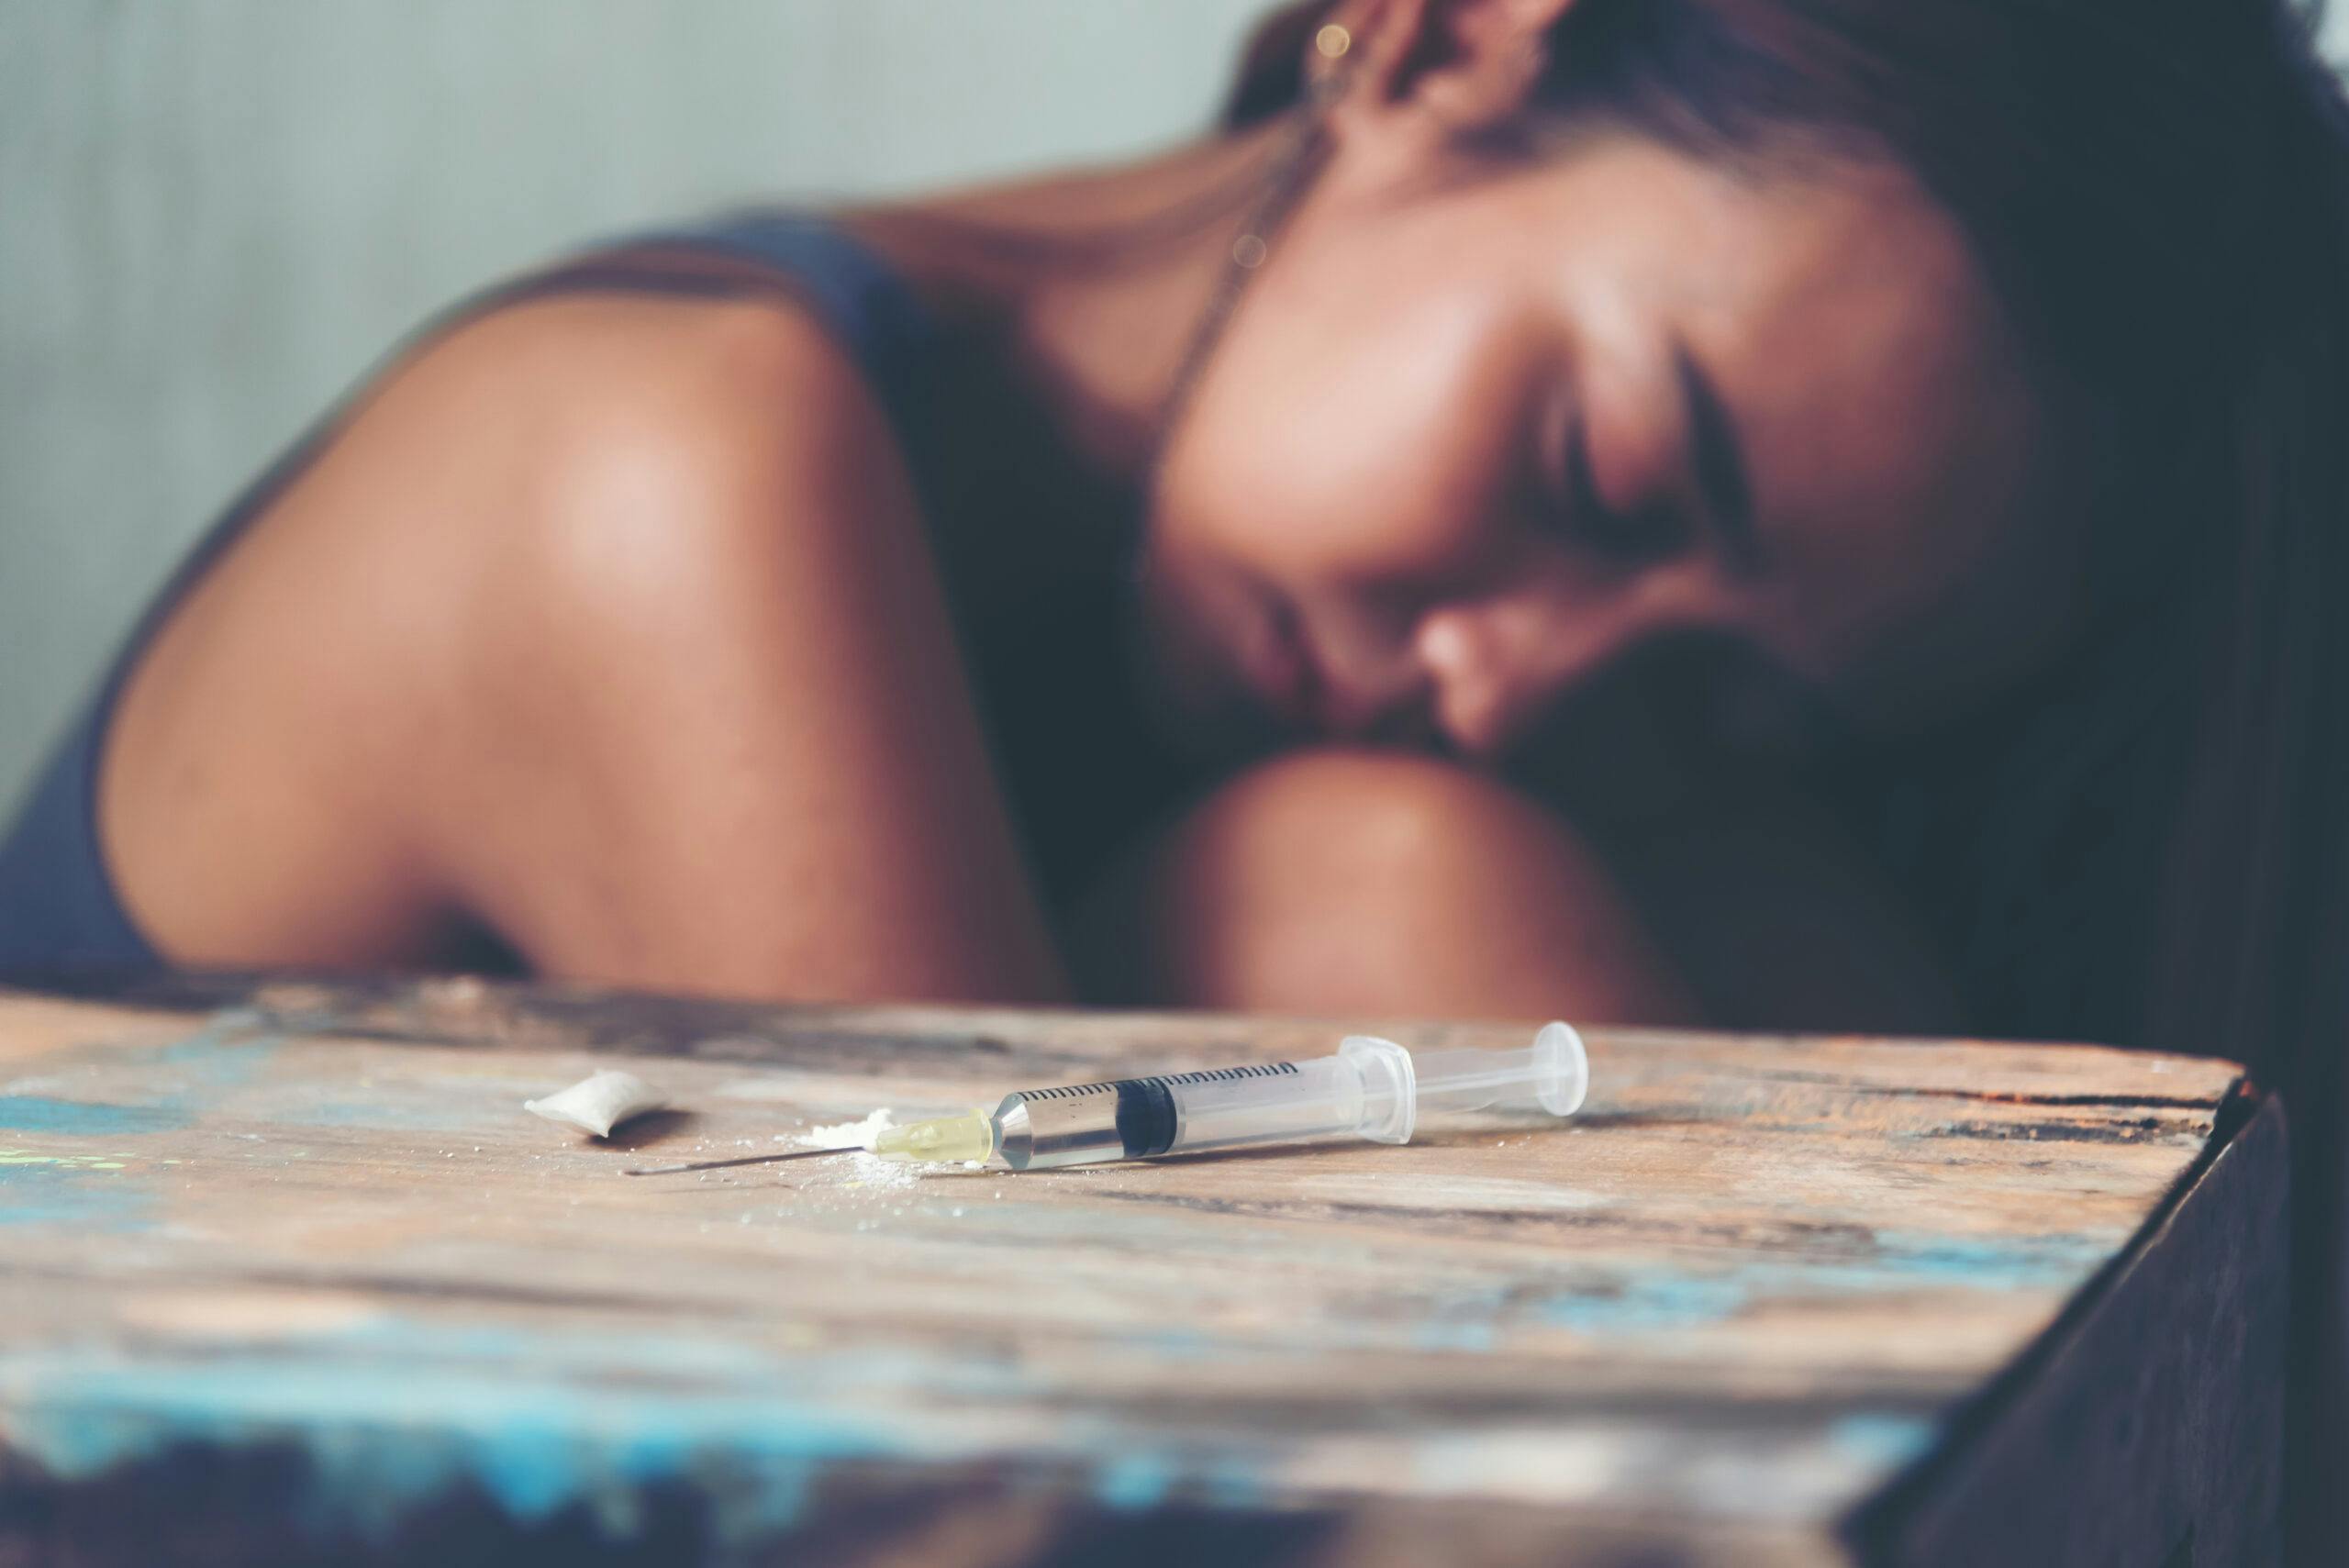 sad woman abusing heroin with needle